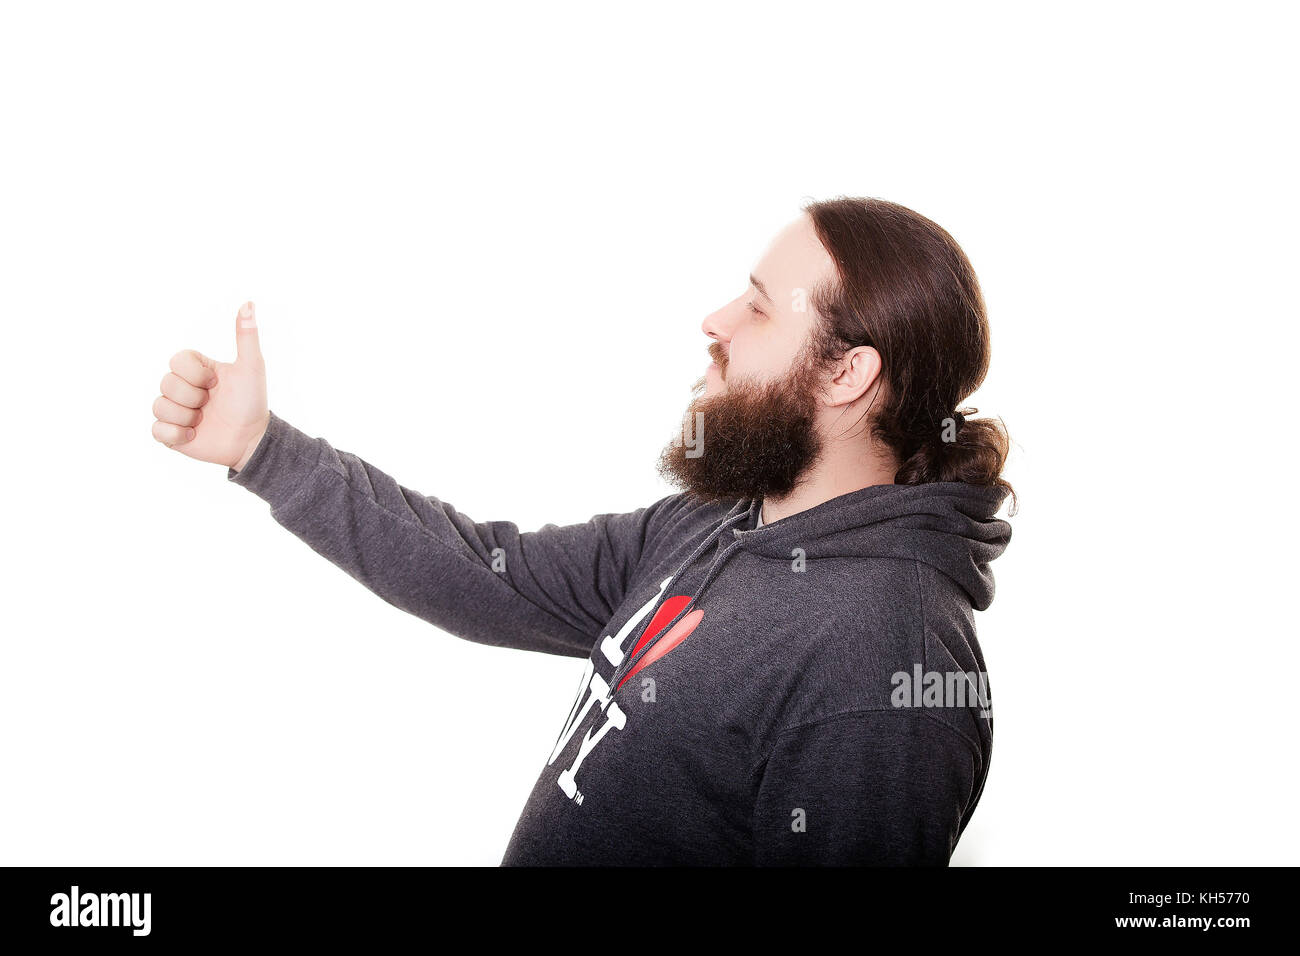 side view bearded man with thumbs up expressing winning behavior Stock Photo